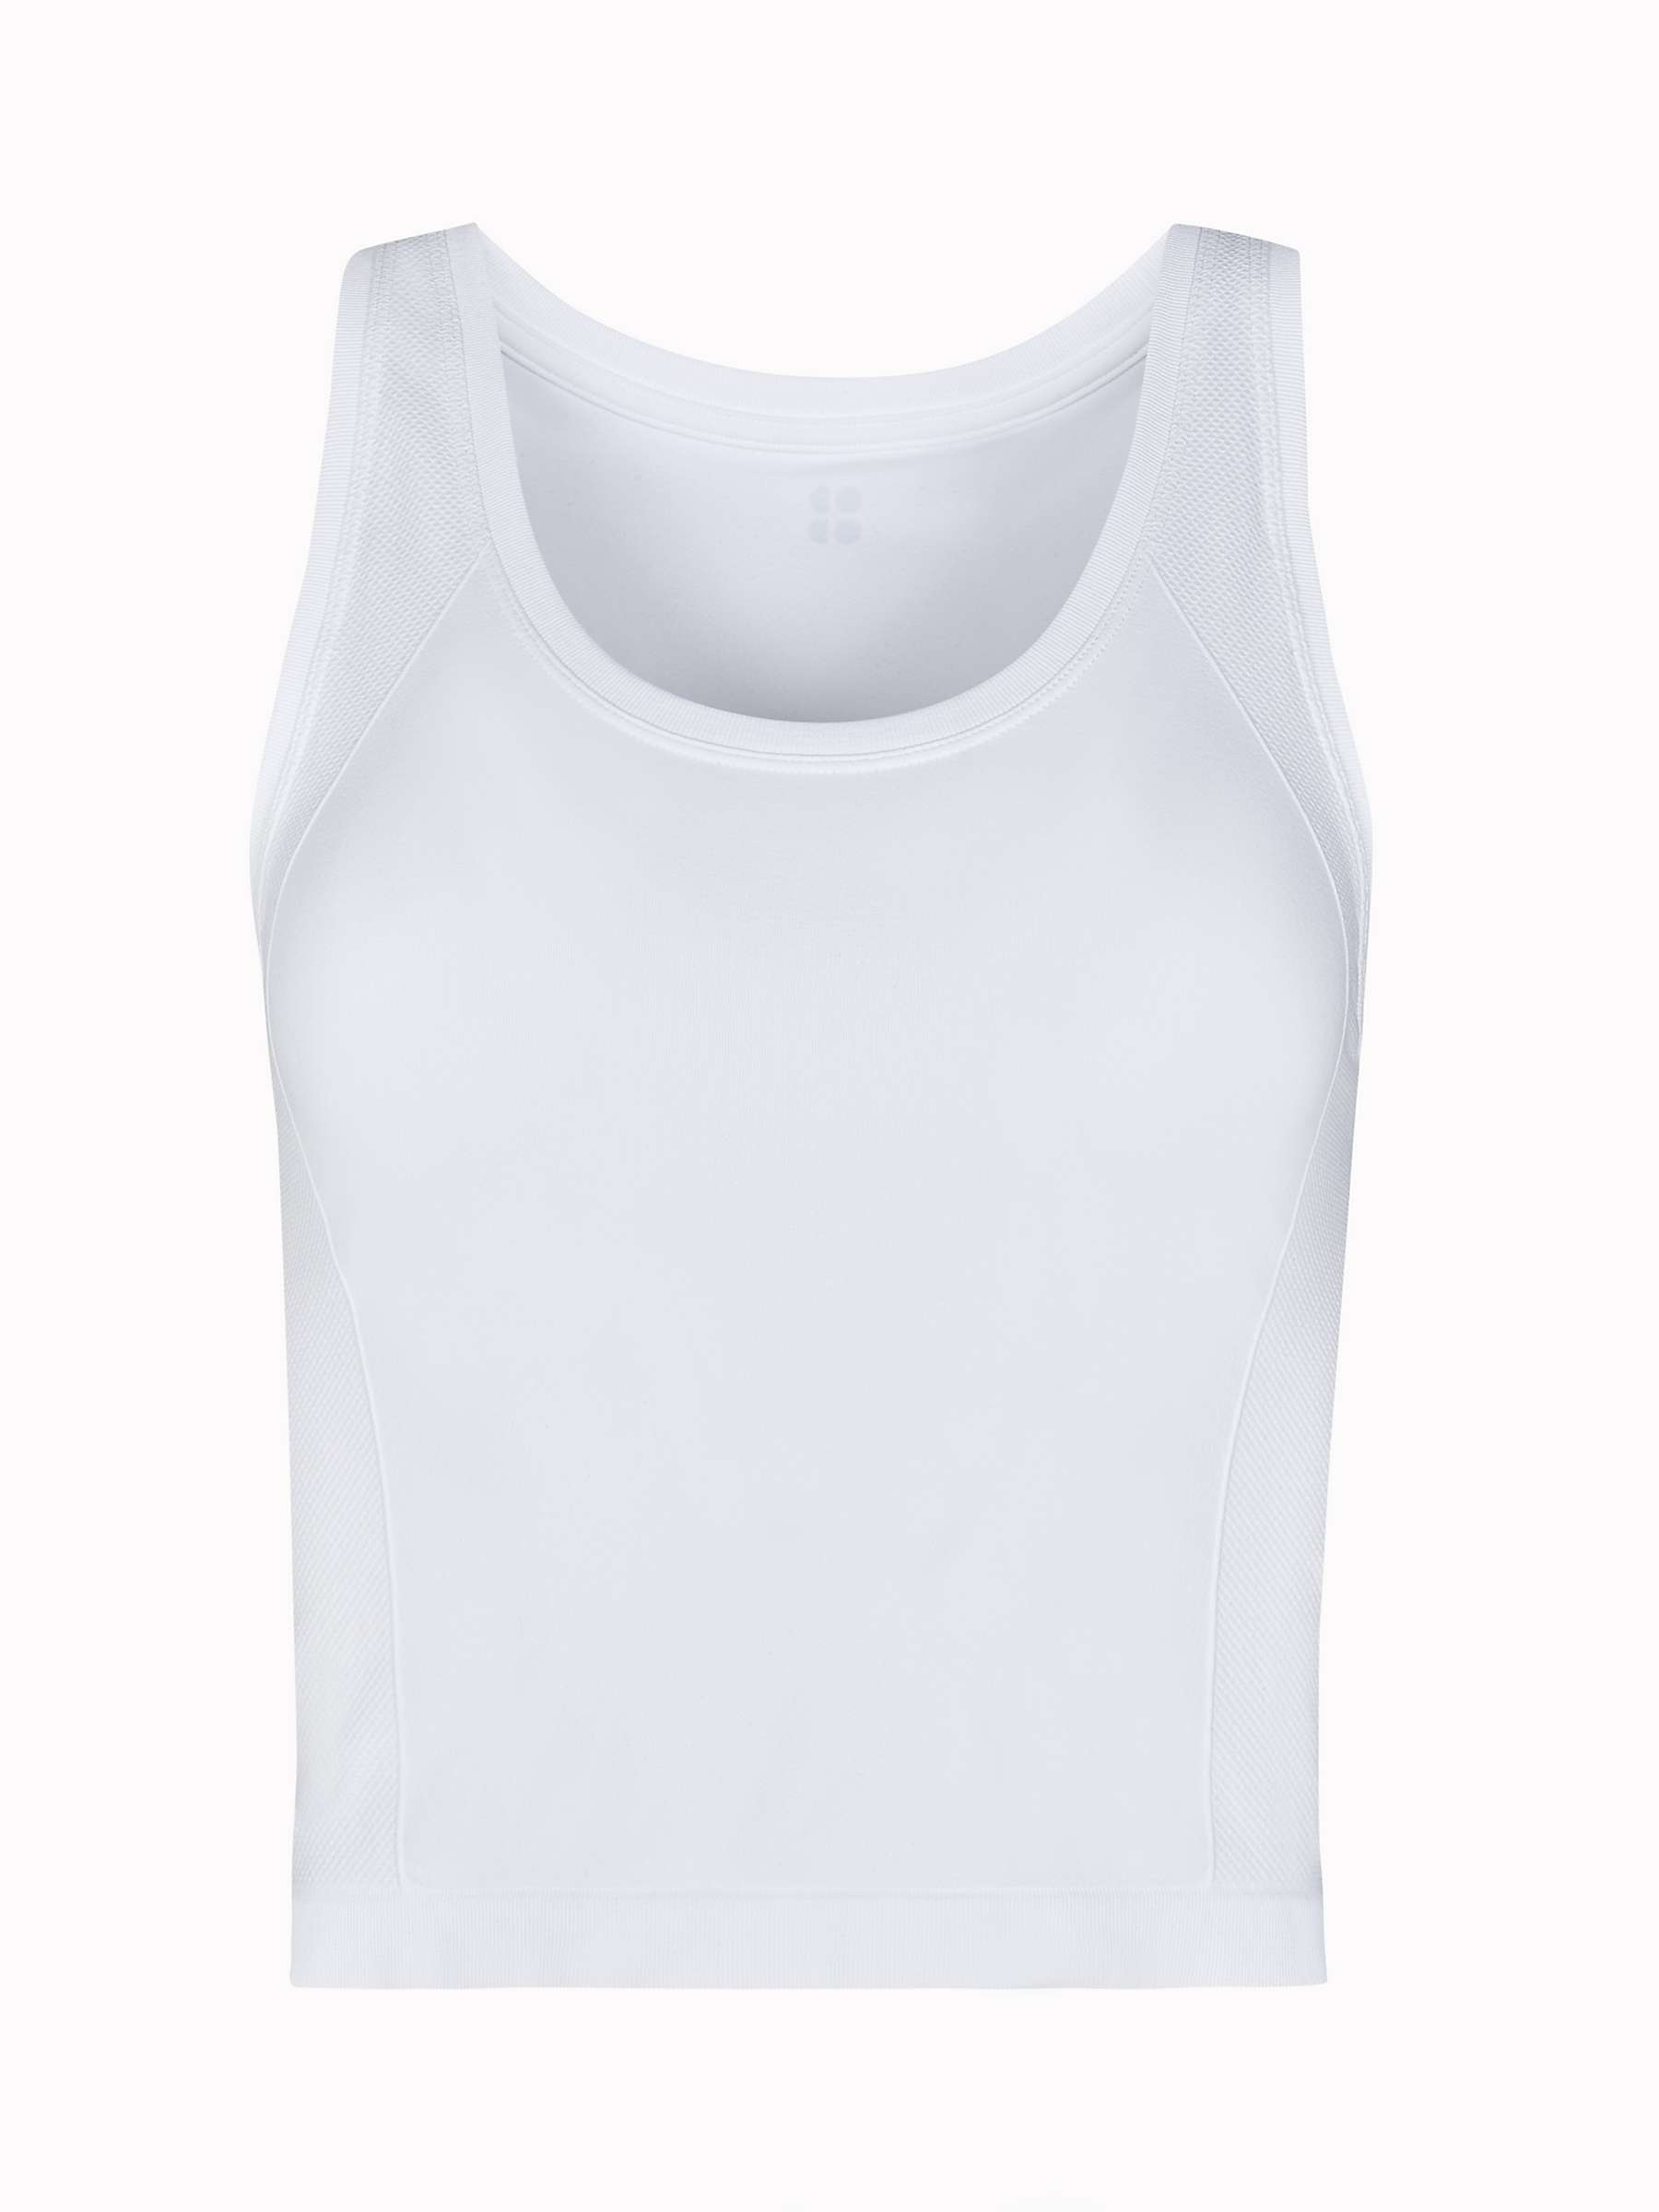 Buy Sweaty Betty Athlete Racerback Cropped Sports Vest Online at johnlewis.com